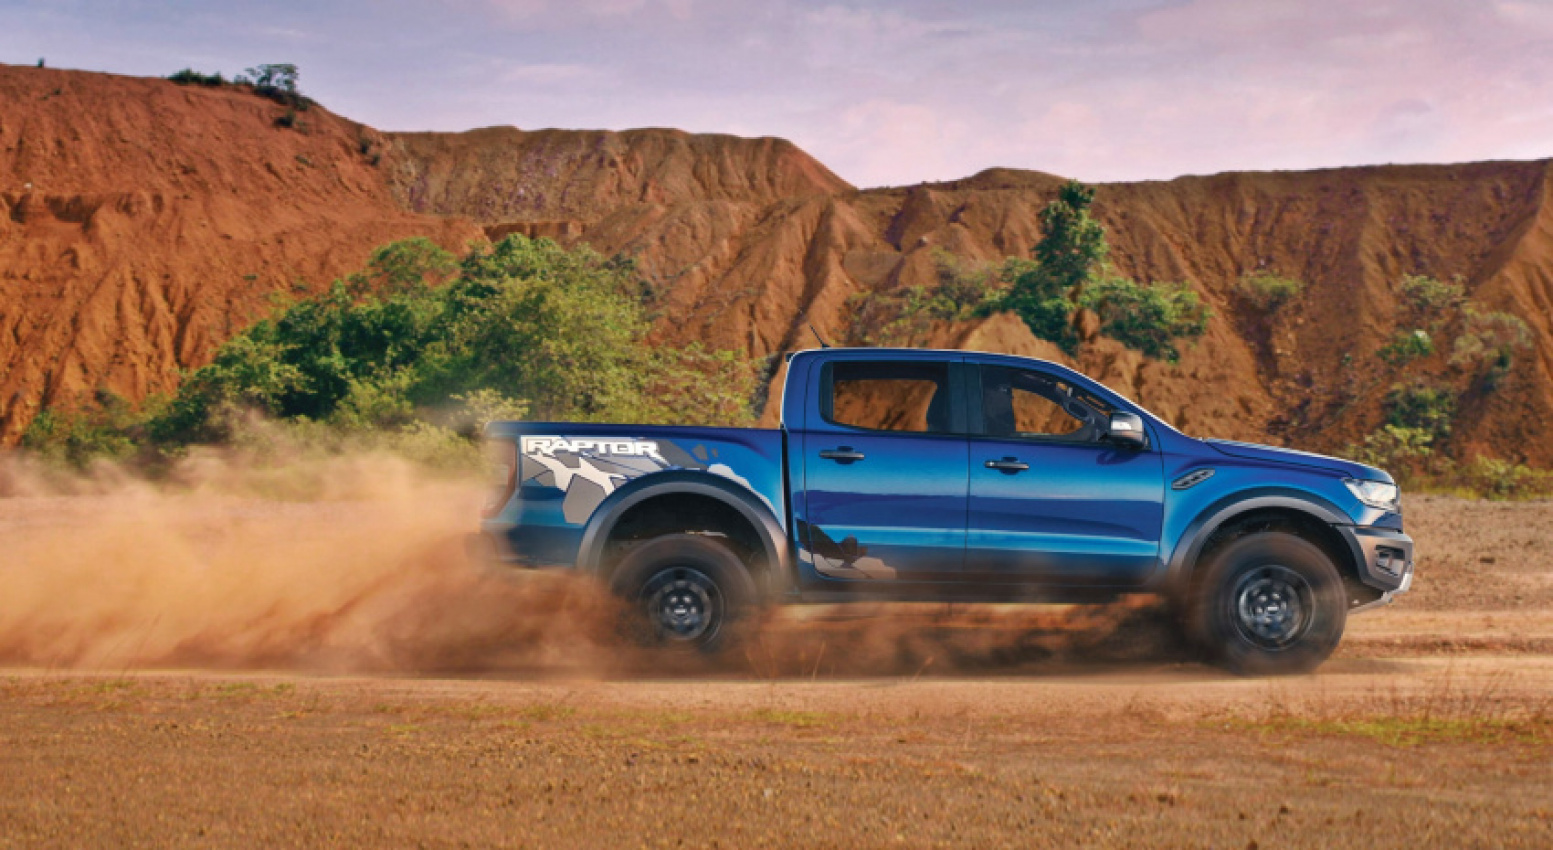 autos, cars, ford, customer activities, ford pick-up truck, ford ranger, ford ranger getaways, live the ranger life, sdac ford, sime darby auto connexion, ‘ford ranger getaways’ by sdac-ford provide owners with ways to enjoy their truck to the fullest